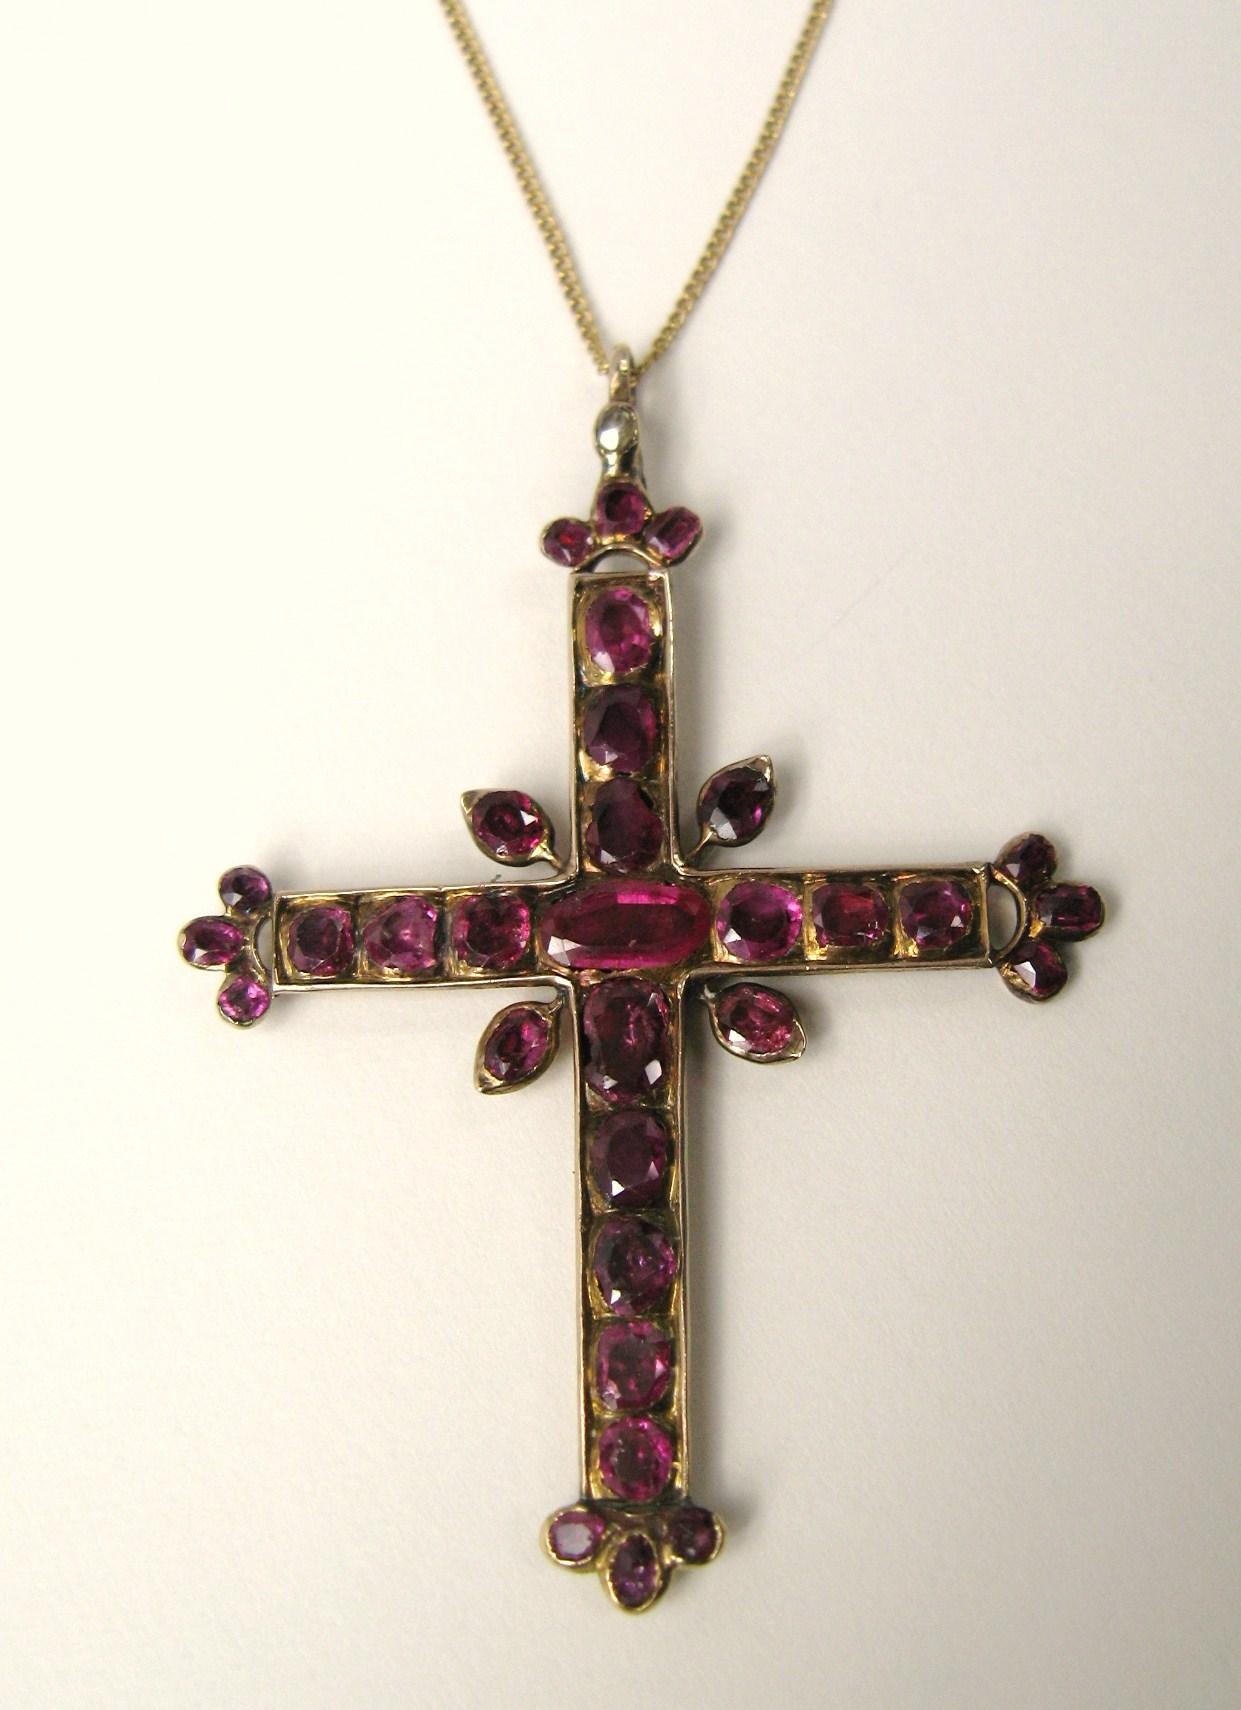 Very large Cross totally covered in Rubies set in 14K gold comes with a 14k gold chain. This is stunning in person. It measures 3.35